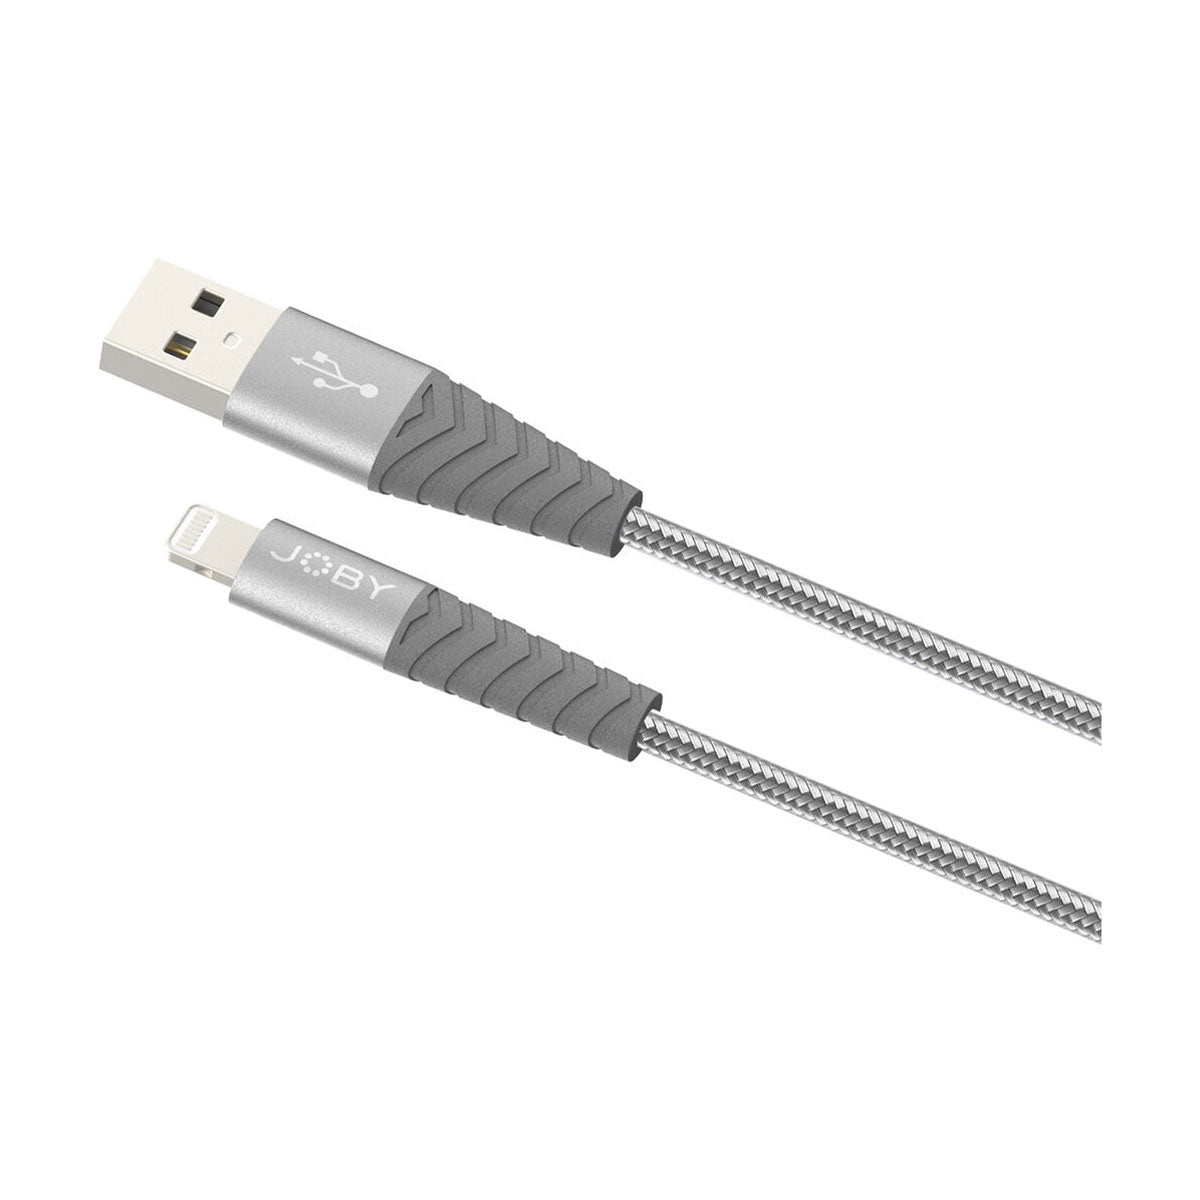 JOBY Charge & Sync USB to Lightning Cable (3.9')